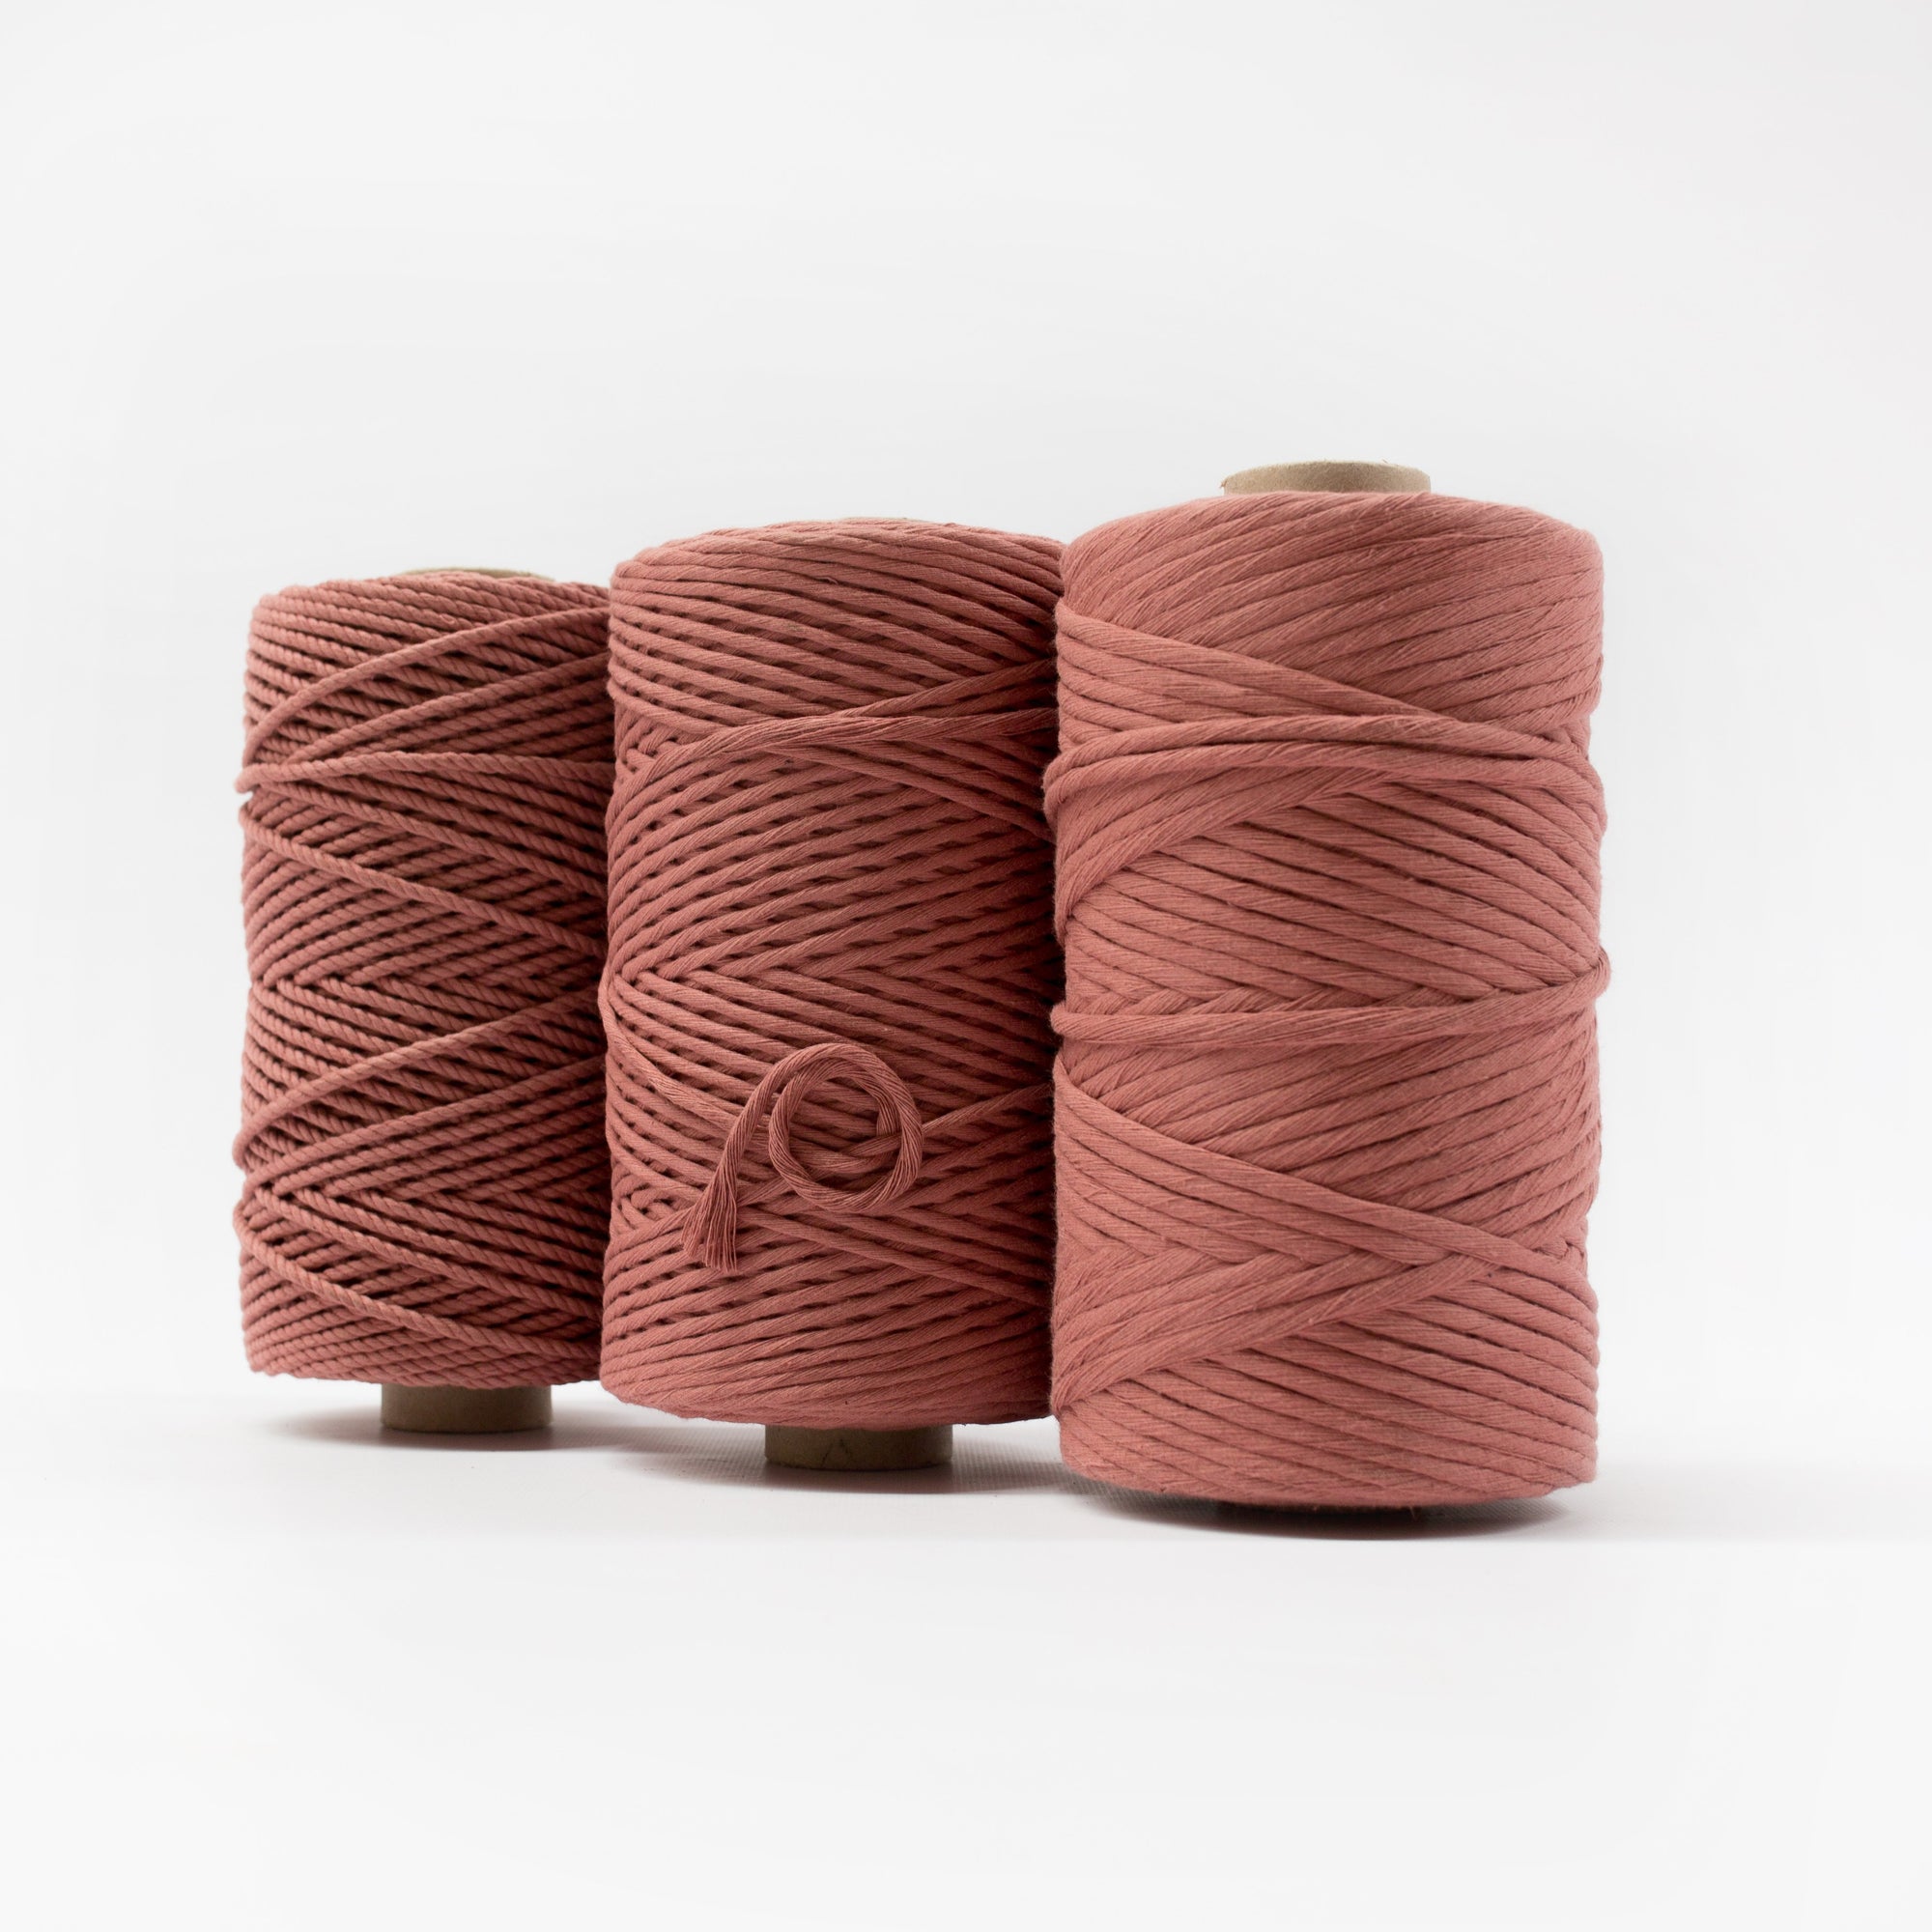 Mary Maker Studio Luxe Colour Cotton 4mm 1KG Recycled Luxe Macrame Rope // Rose Tea macrame cotton macrame rope macrame workshop macrame patterns macrame